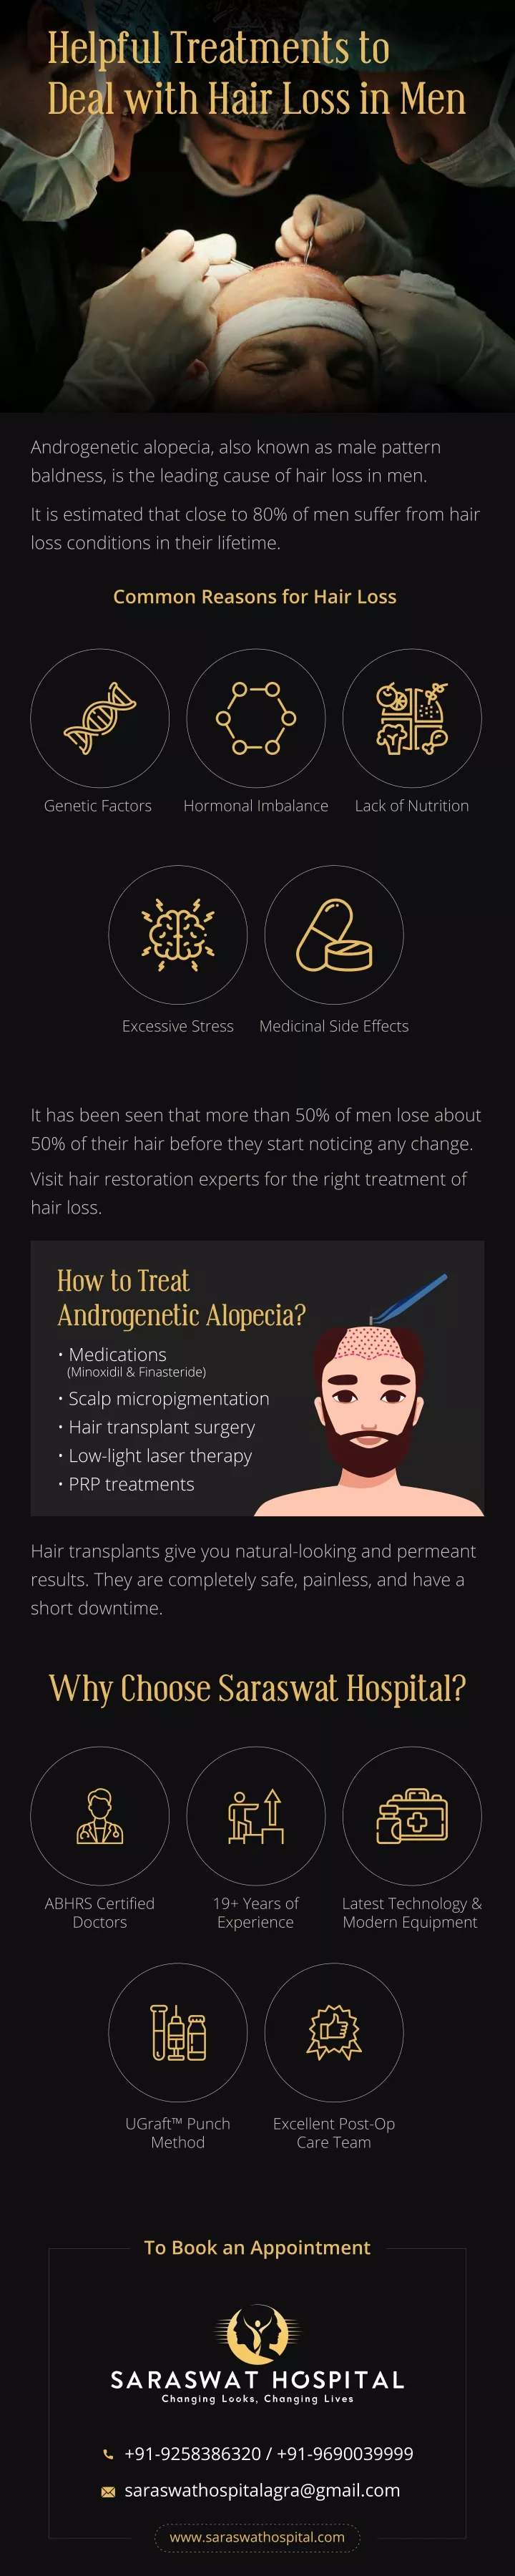 helpful treatments to deal with hair loss in men